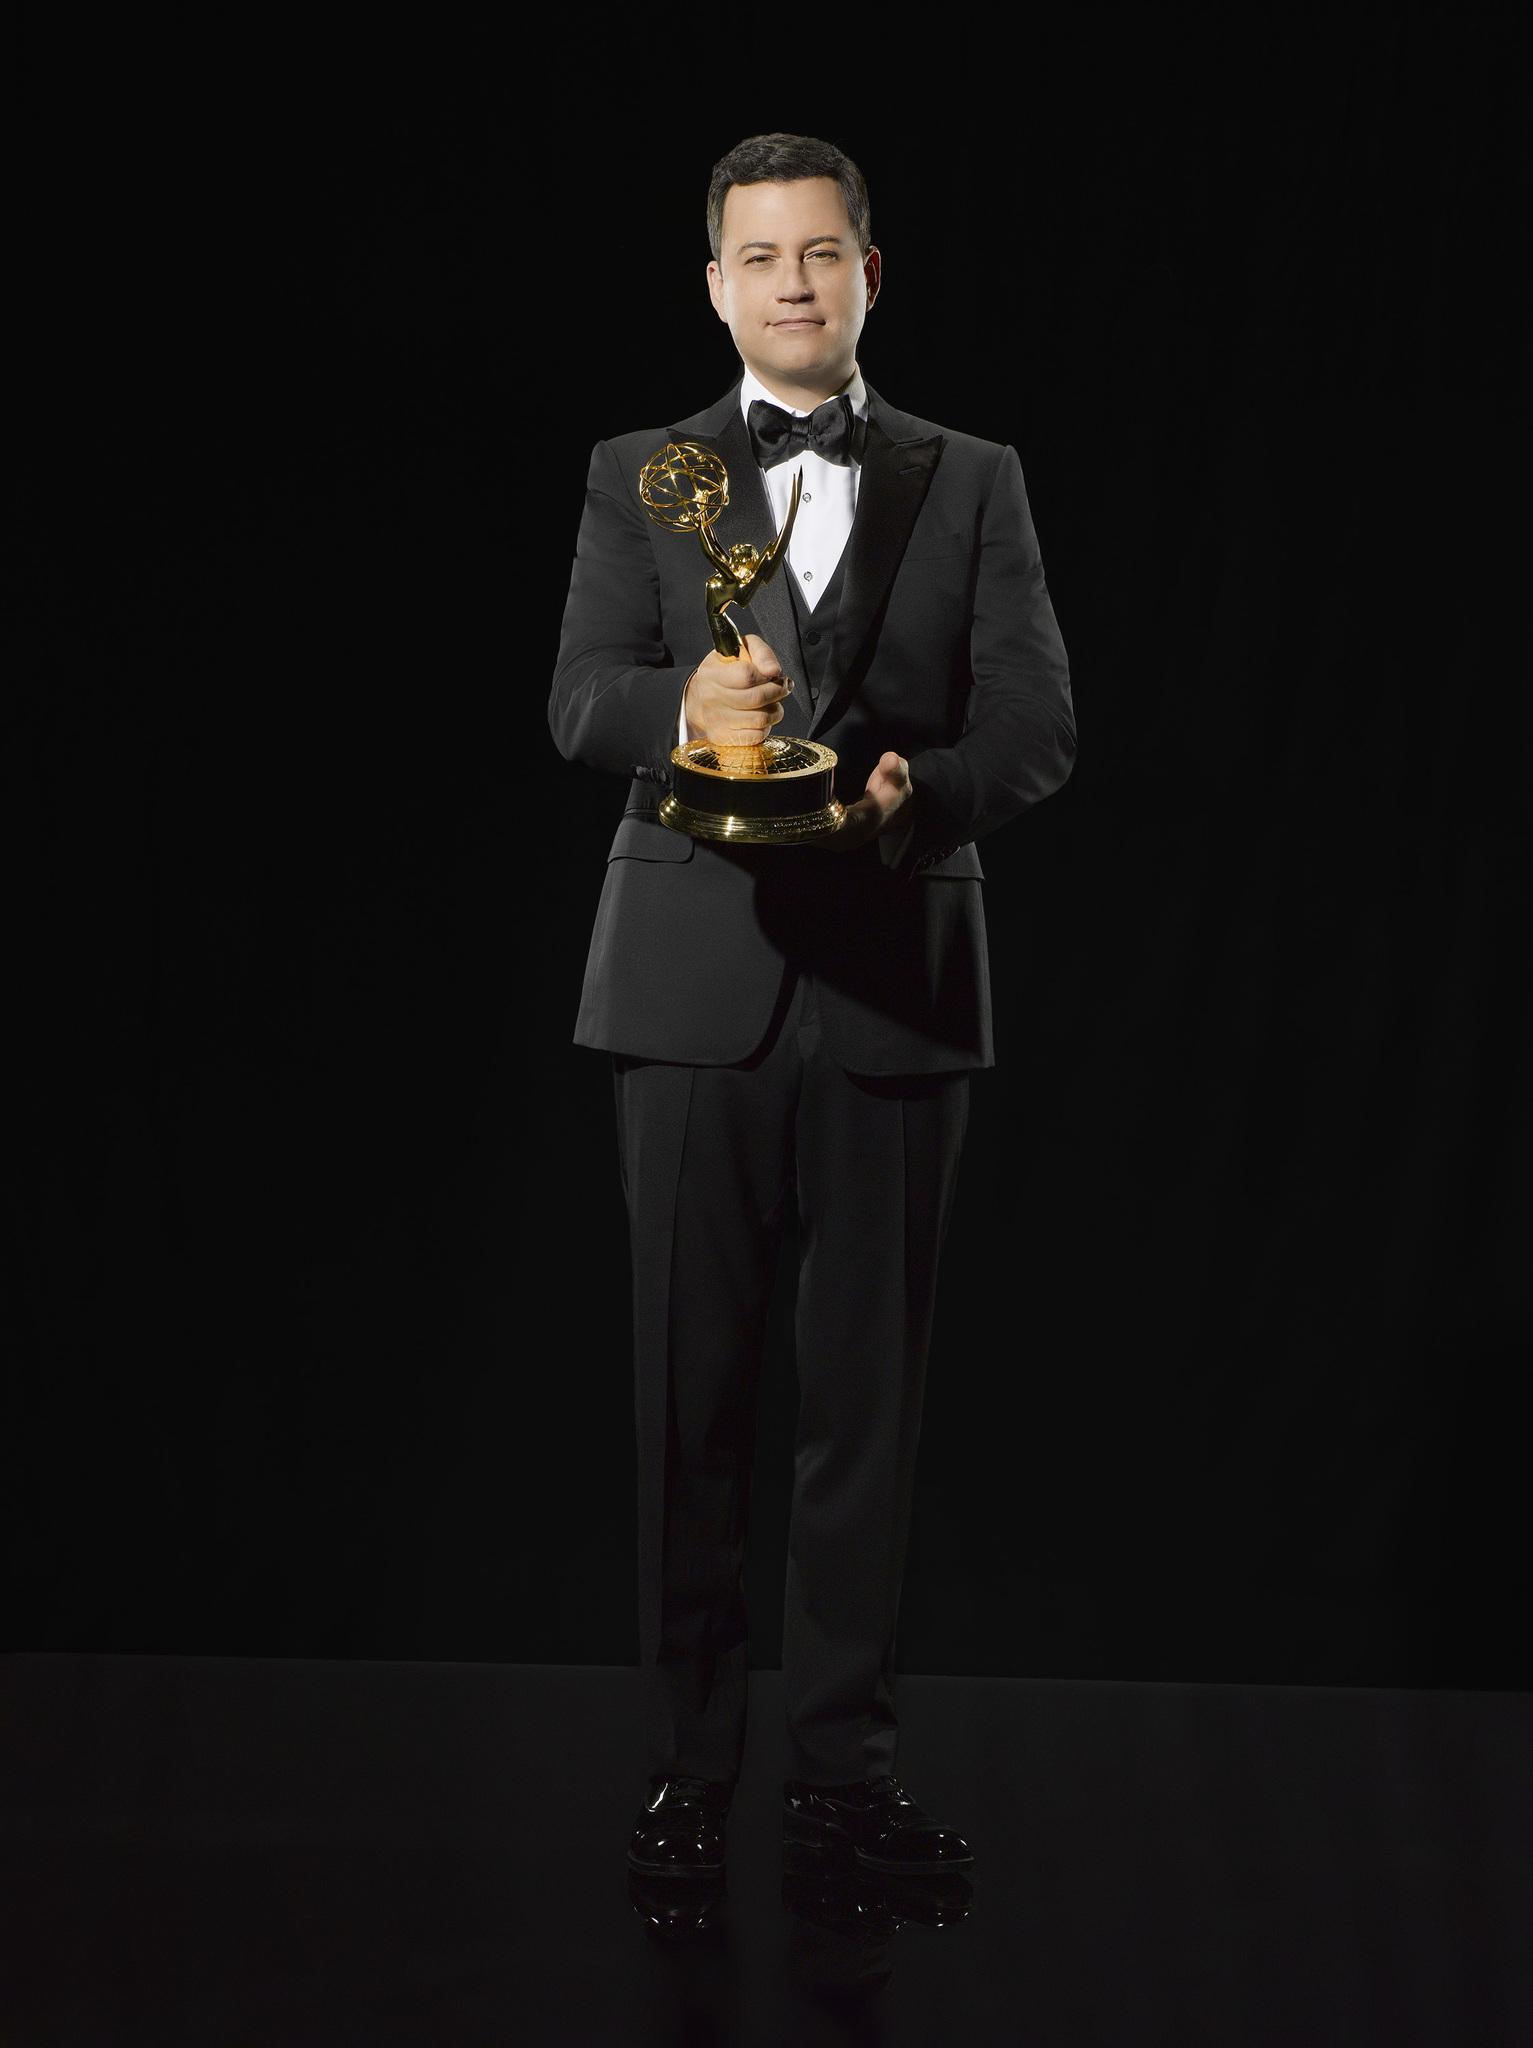 Jimmy Kimmel at event of The 64th Primetime Emmy Awards (2012)